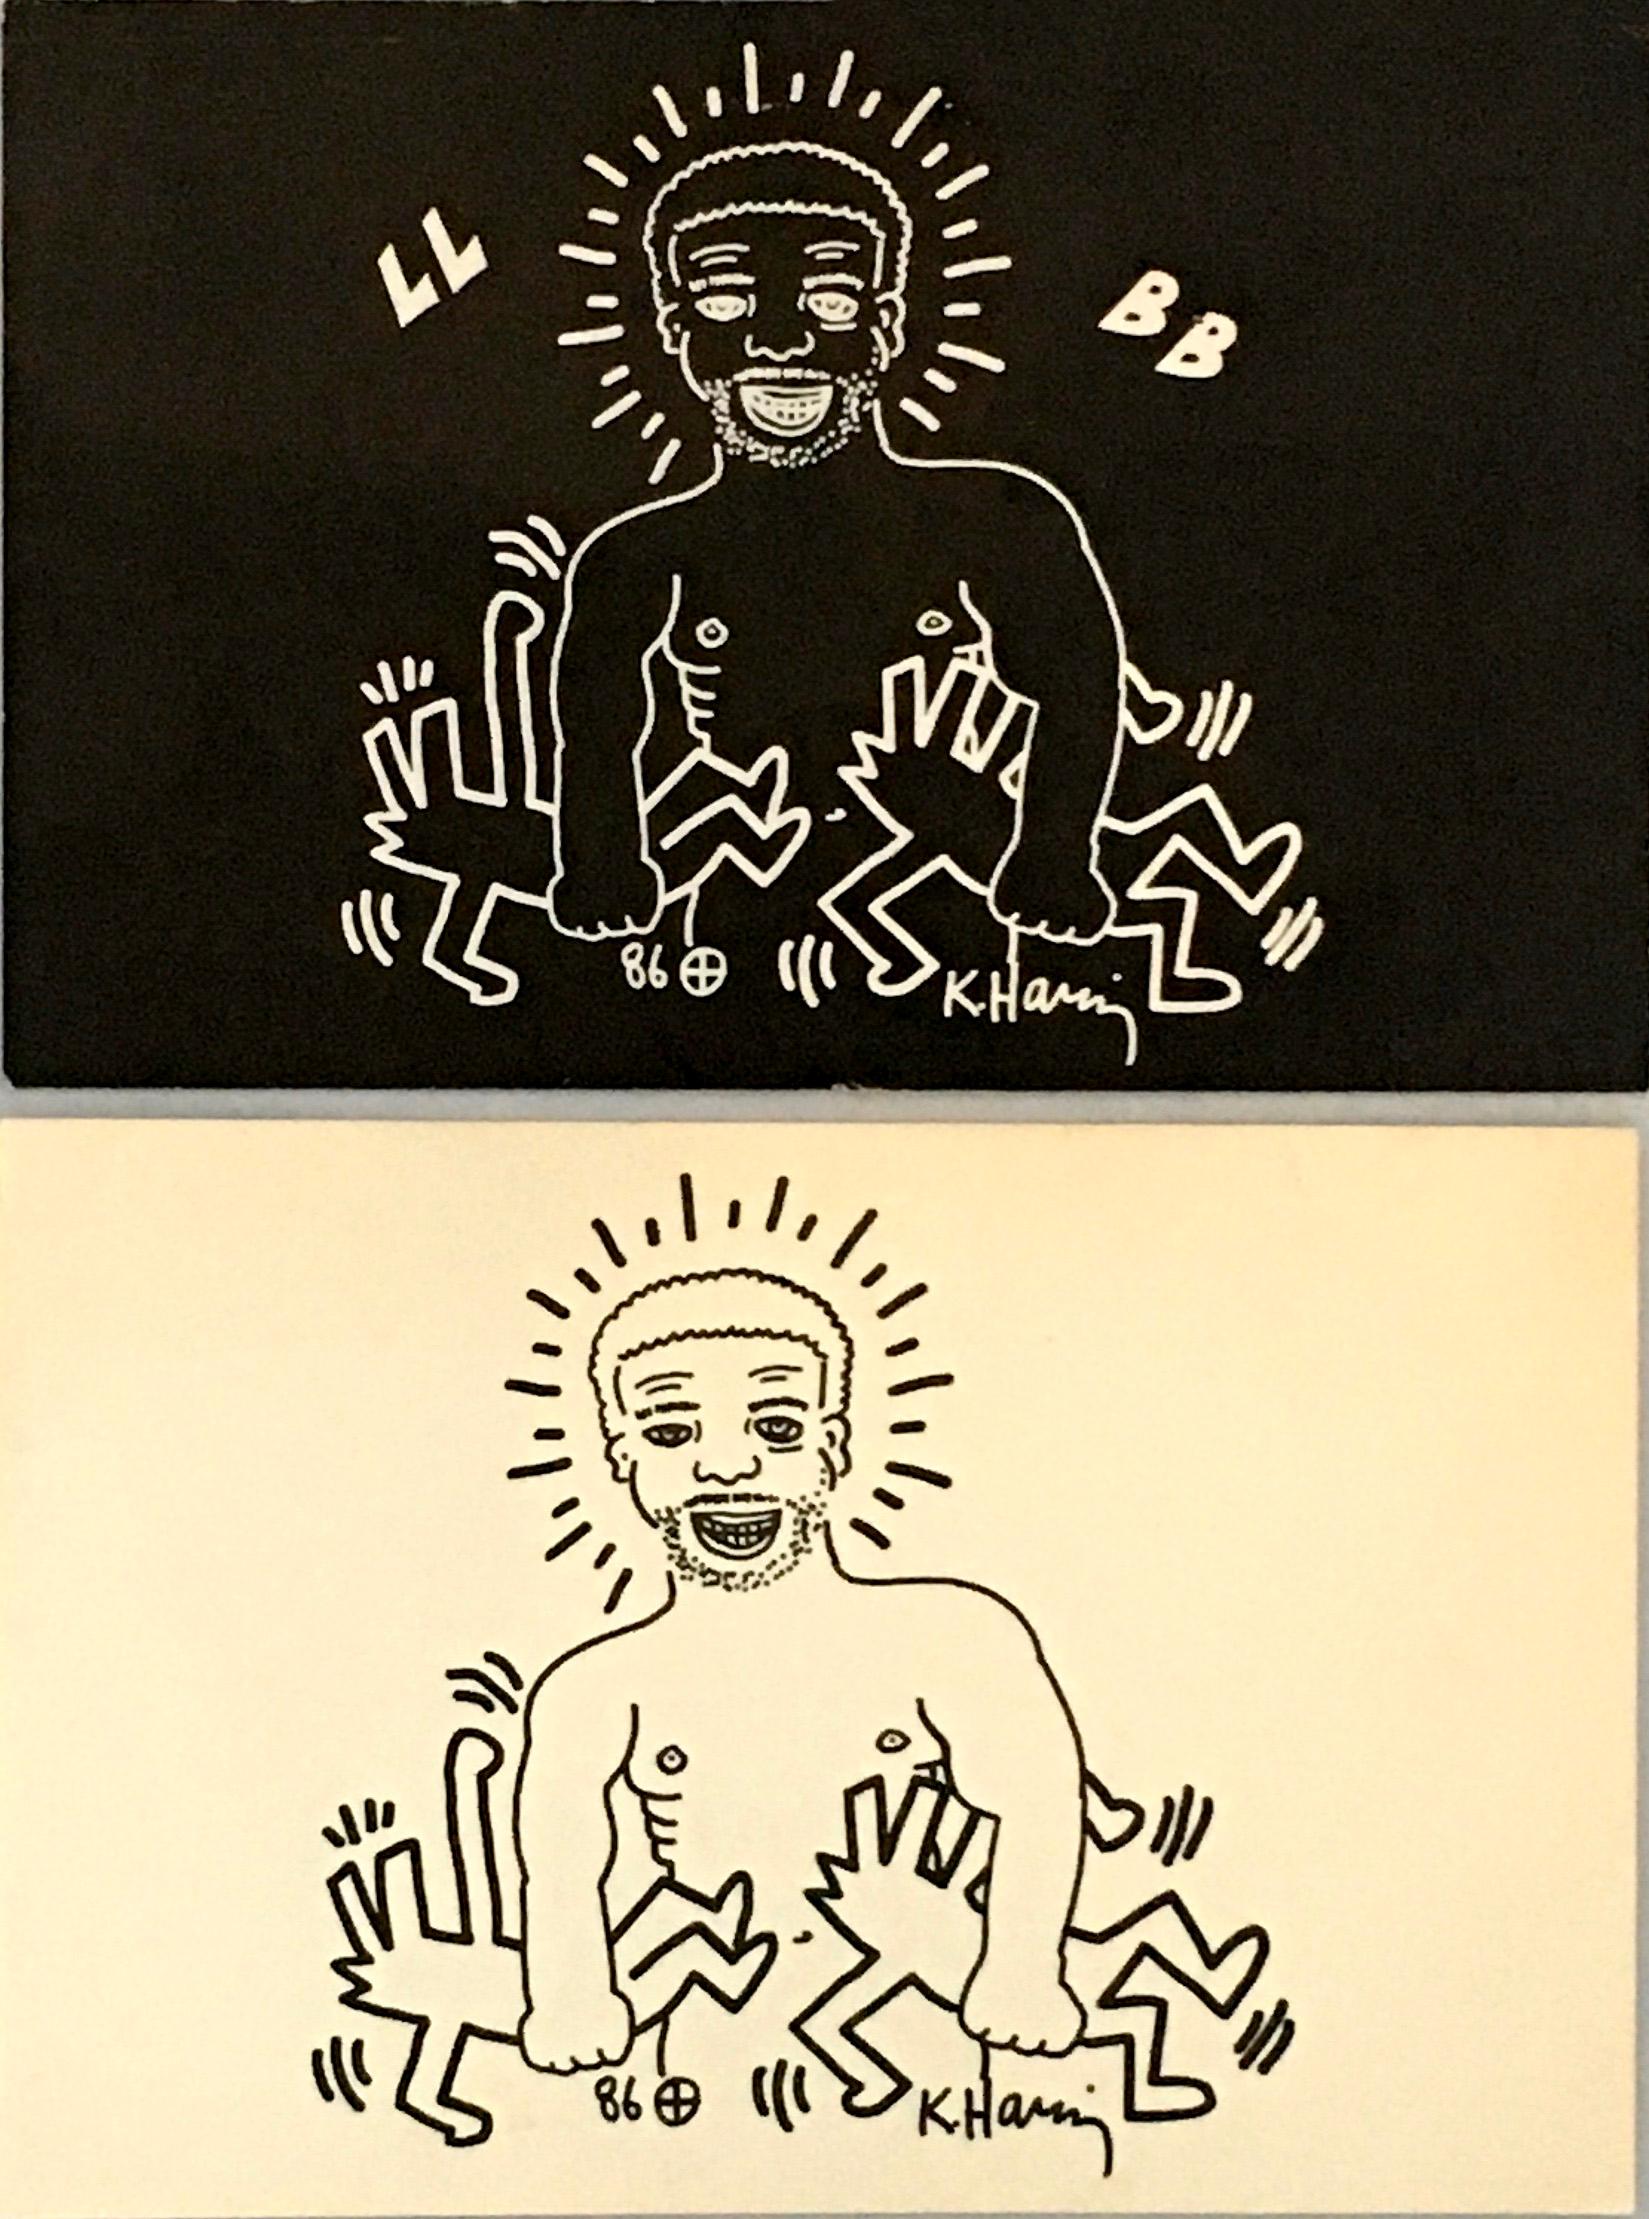 Keith Haring, Paradise Garage, 1986 
Complete set of two rare, highly sought-after invites created by Haring for the historic two night, 1986 birthday celebration of Larry Levan at Paradise Garage (one for a private reception held on Wednesday July